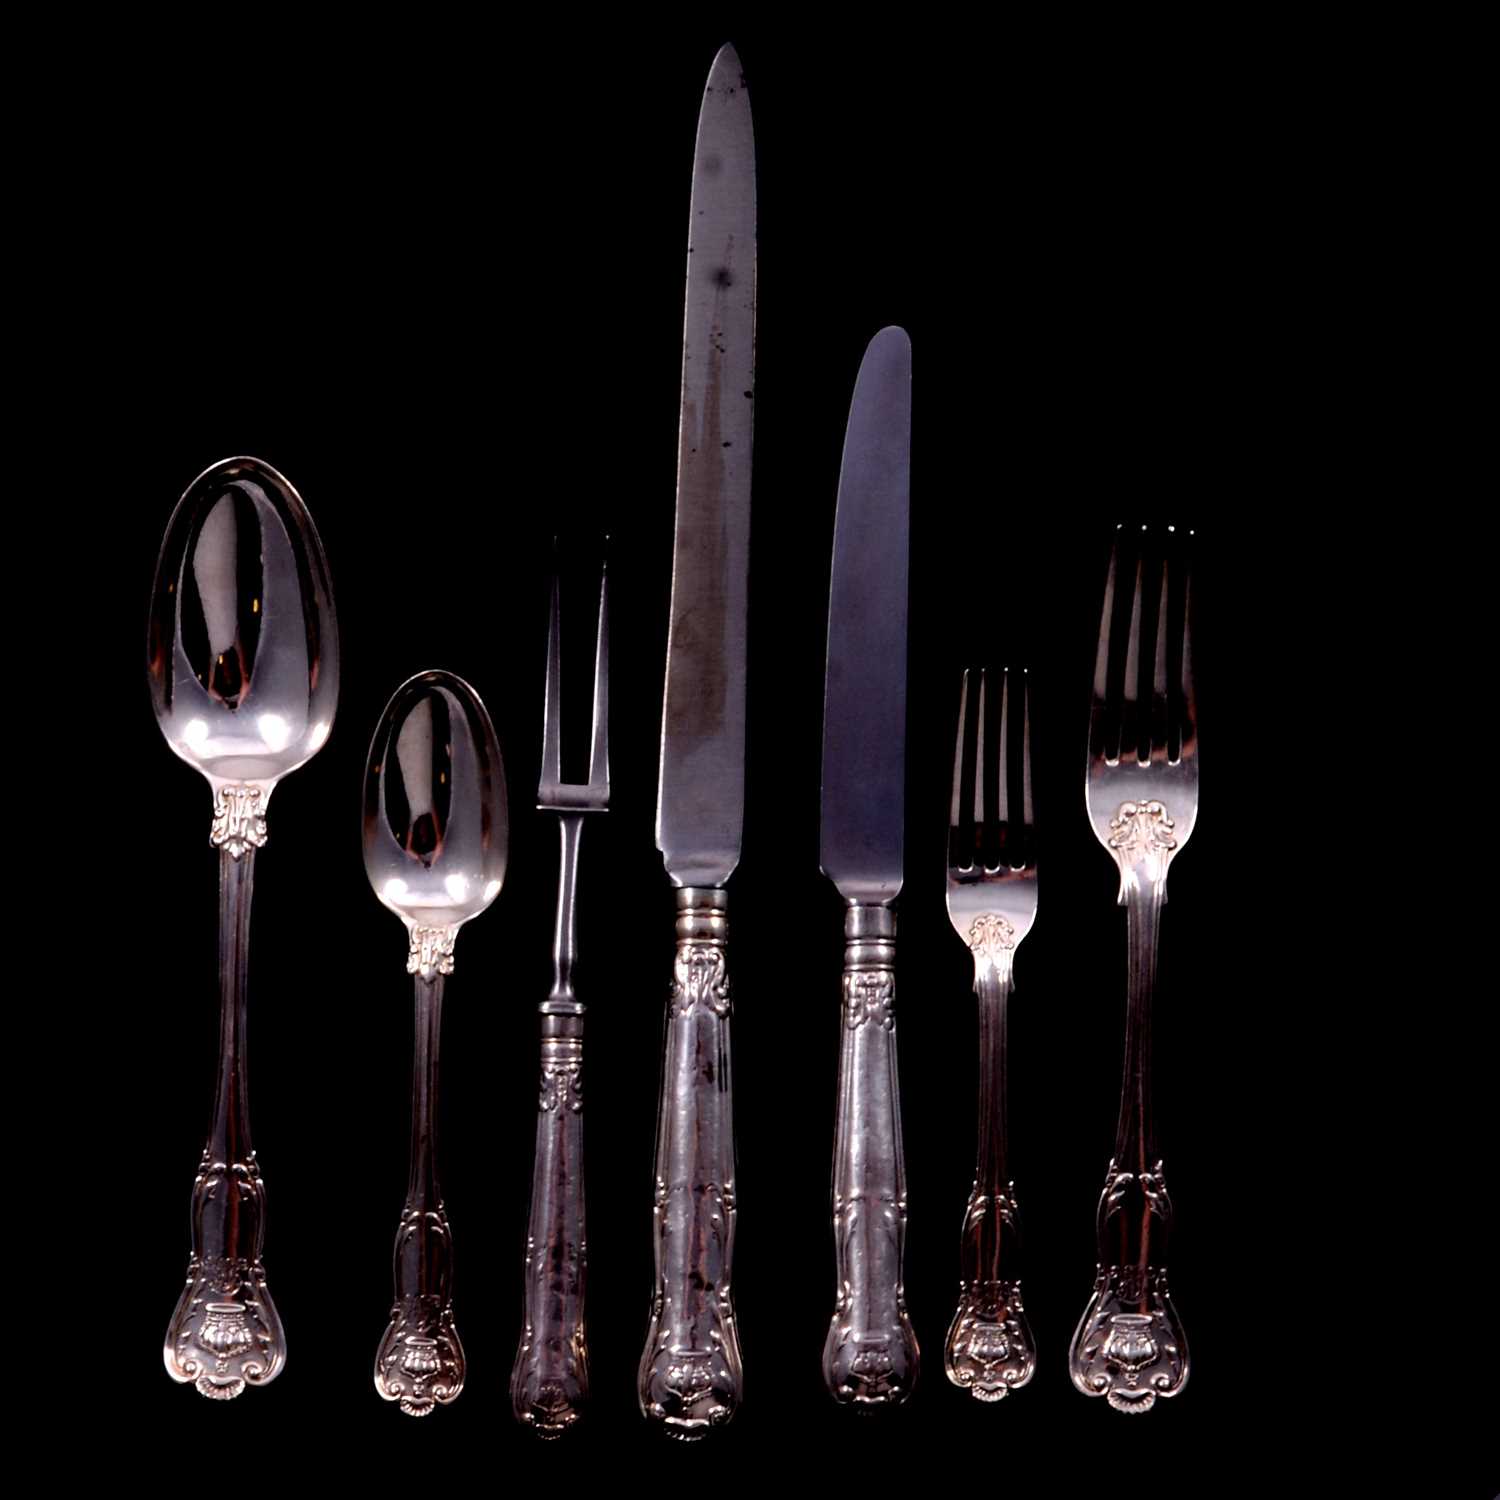 Matched silver cutlery,